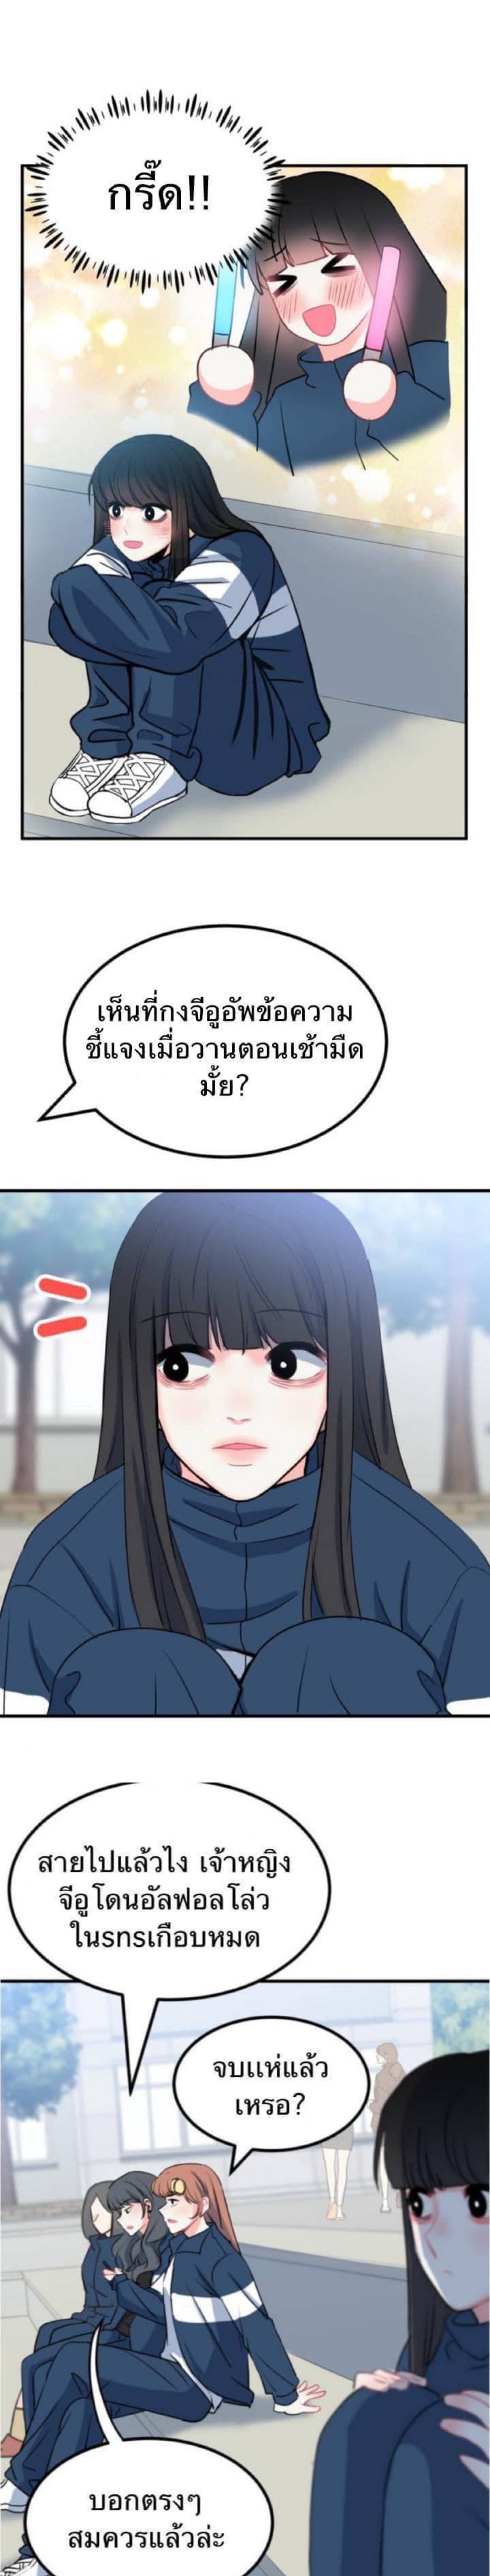 Mary’s Burning Circuit of Happiness ตอนที่ 4